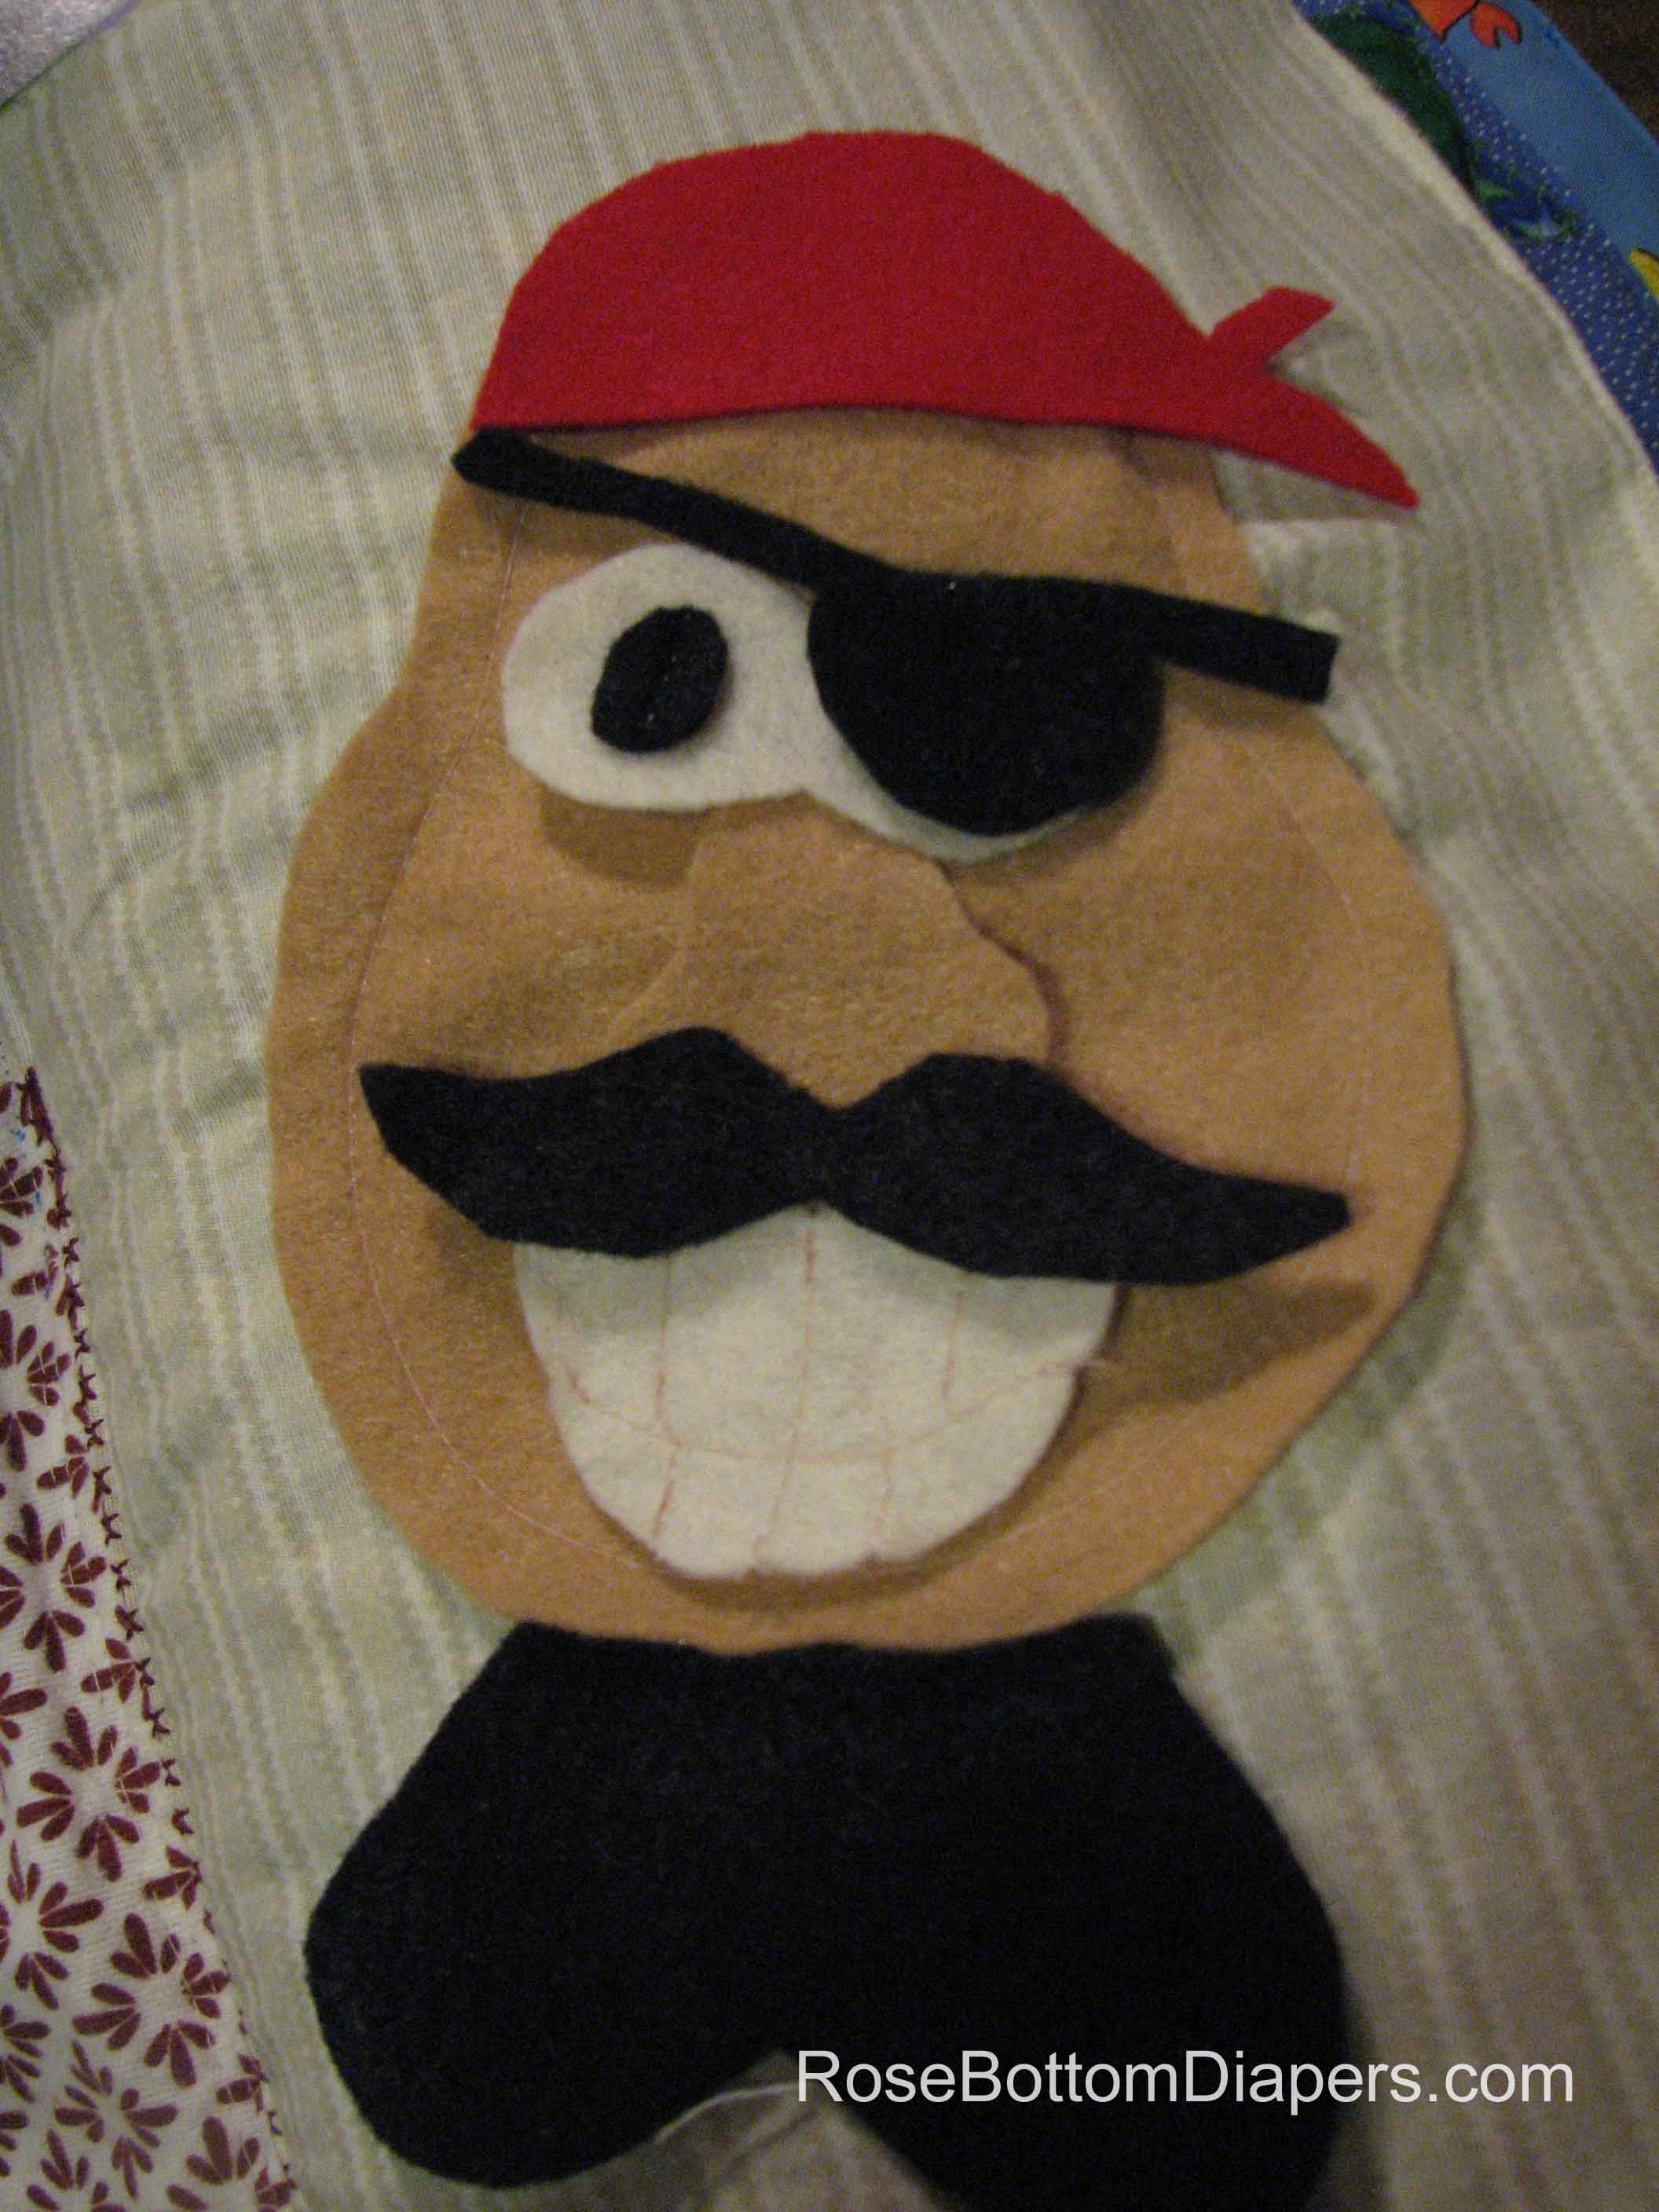 Mr. Potato Head quiet book page.  Fun learning for kids. Busy book ideas at RoseBottomDiapers.com